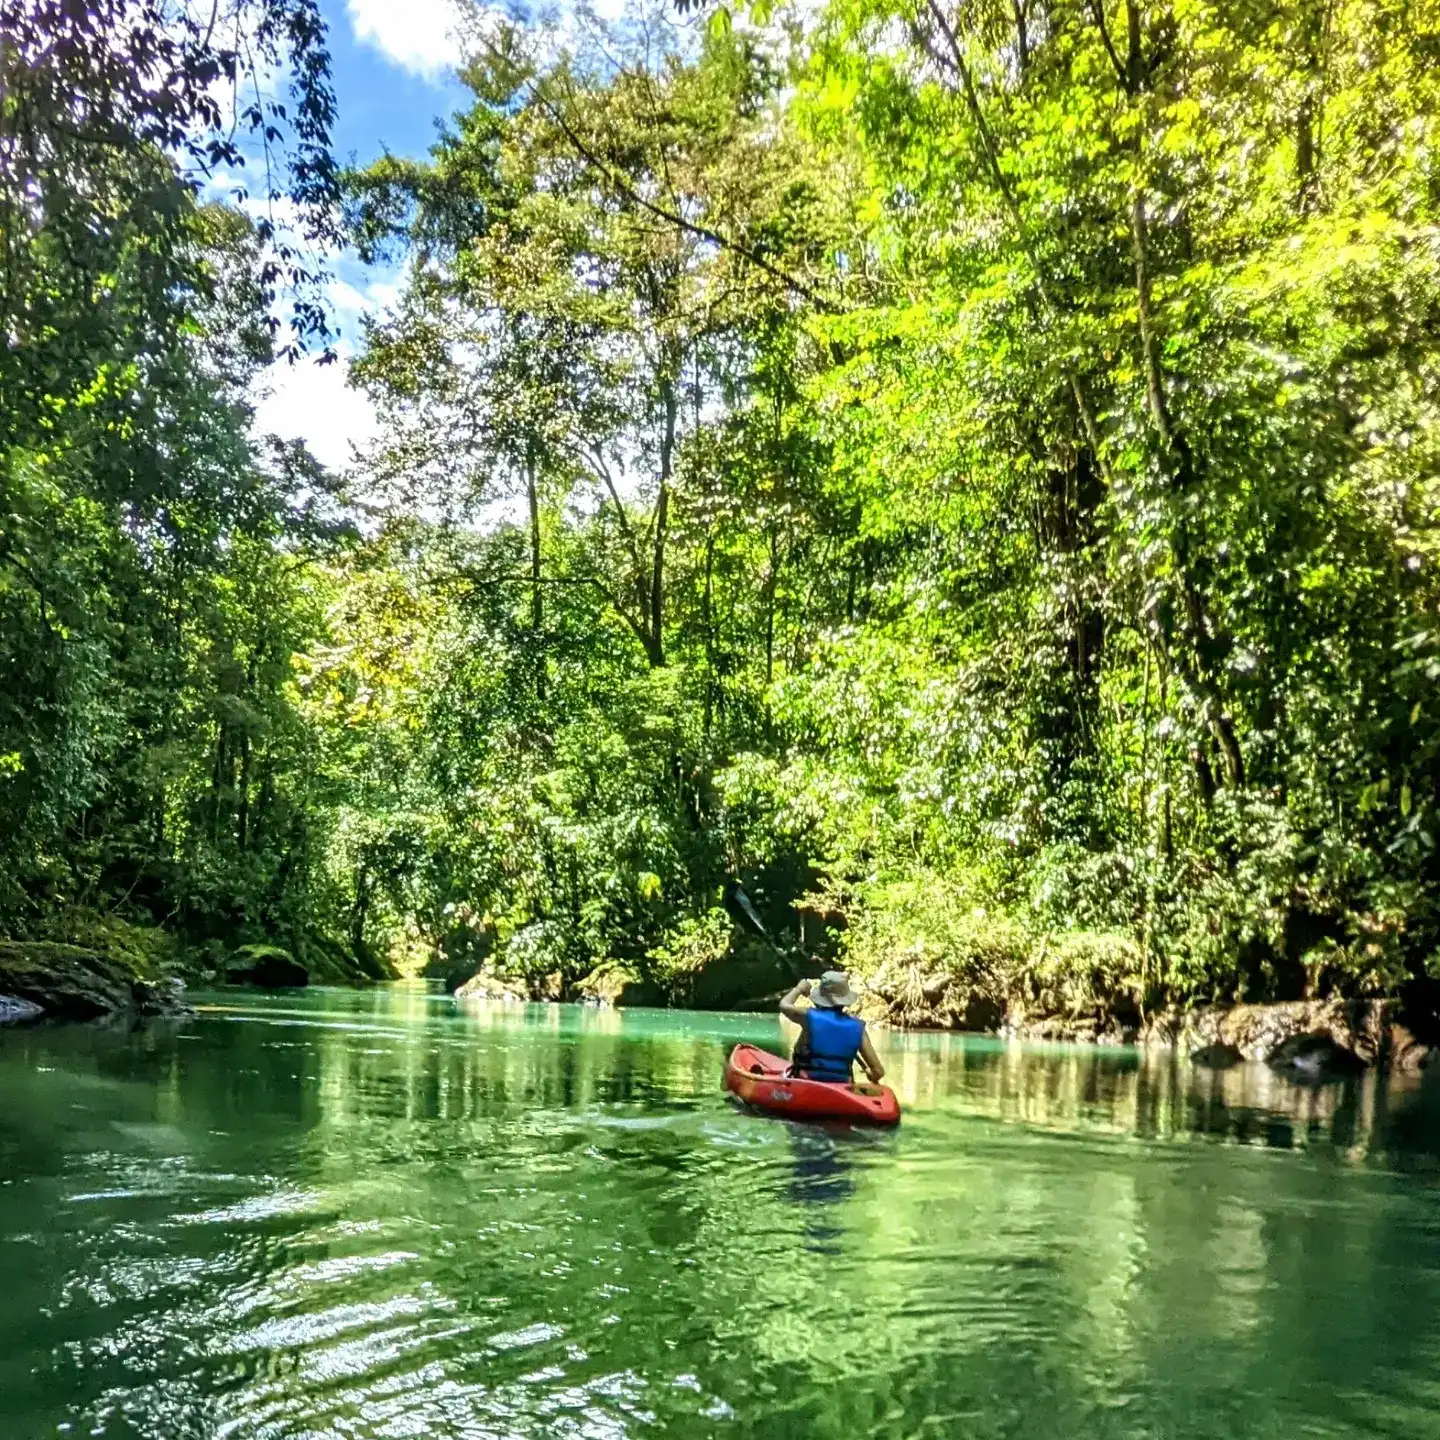 A person riding a kayak on a river in the jungle